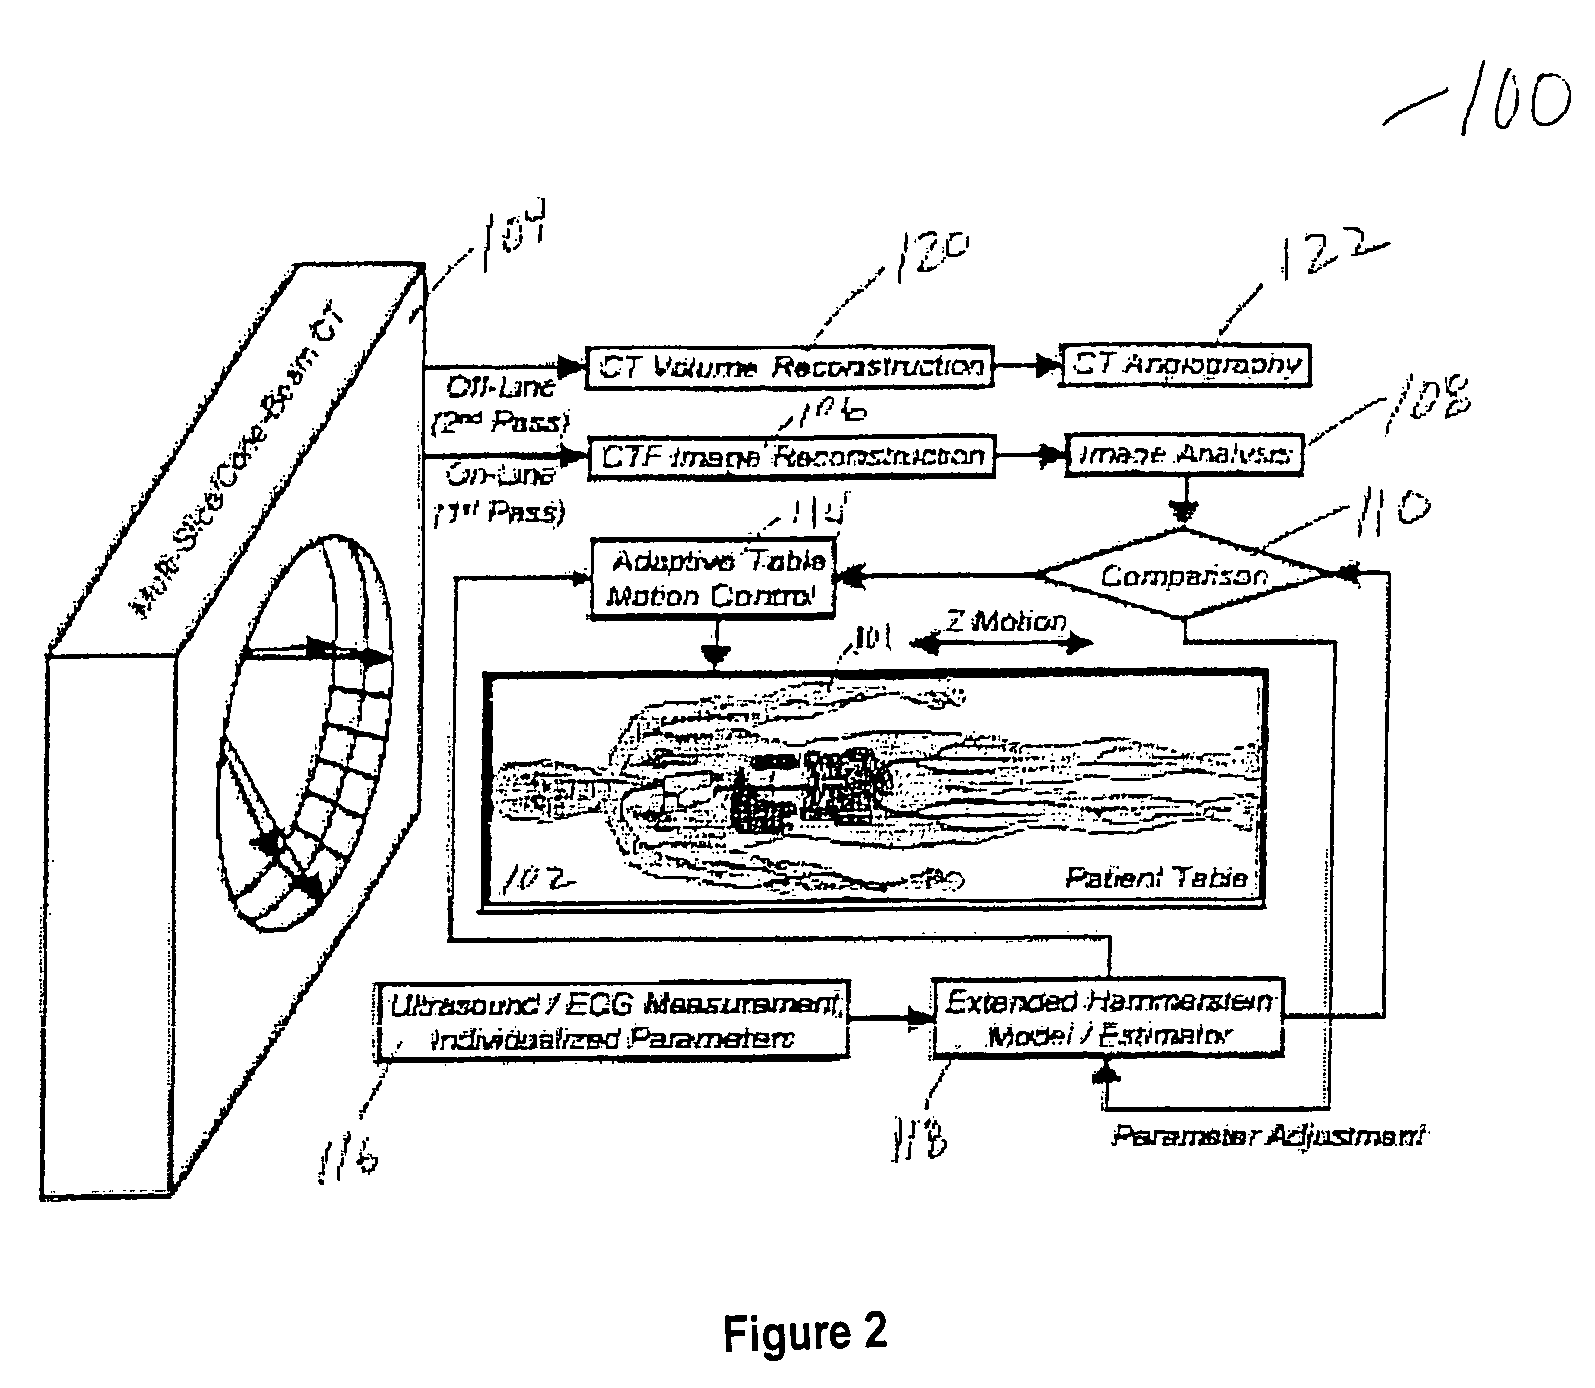 System and method for adaptive bolus chasing computed tomography (CT) angiography